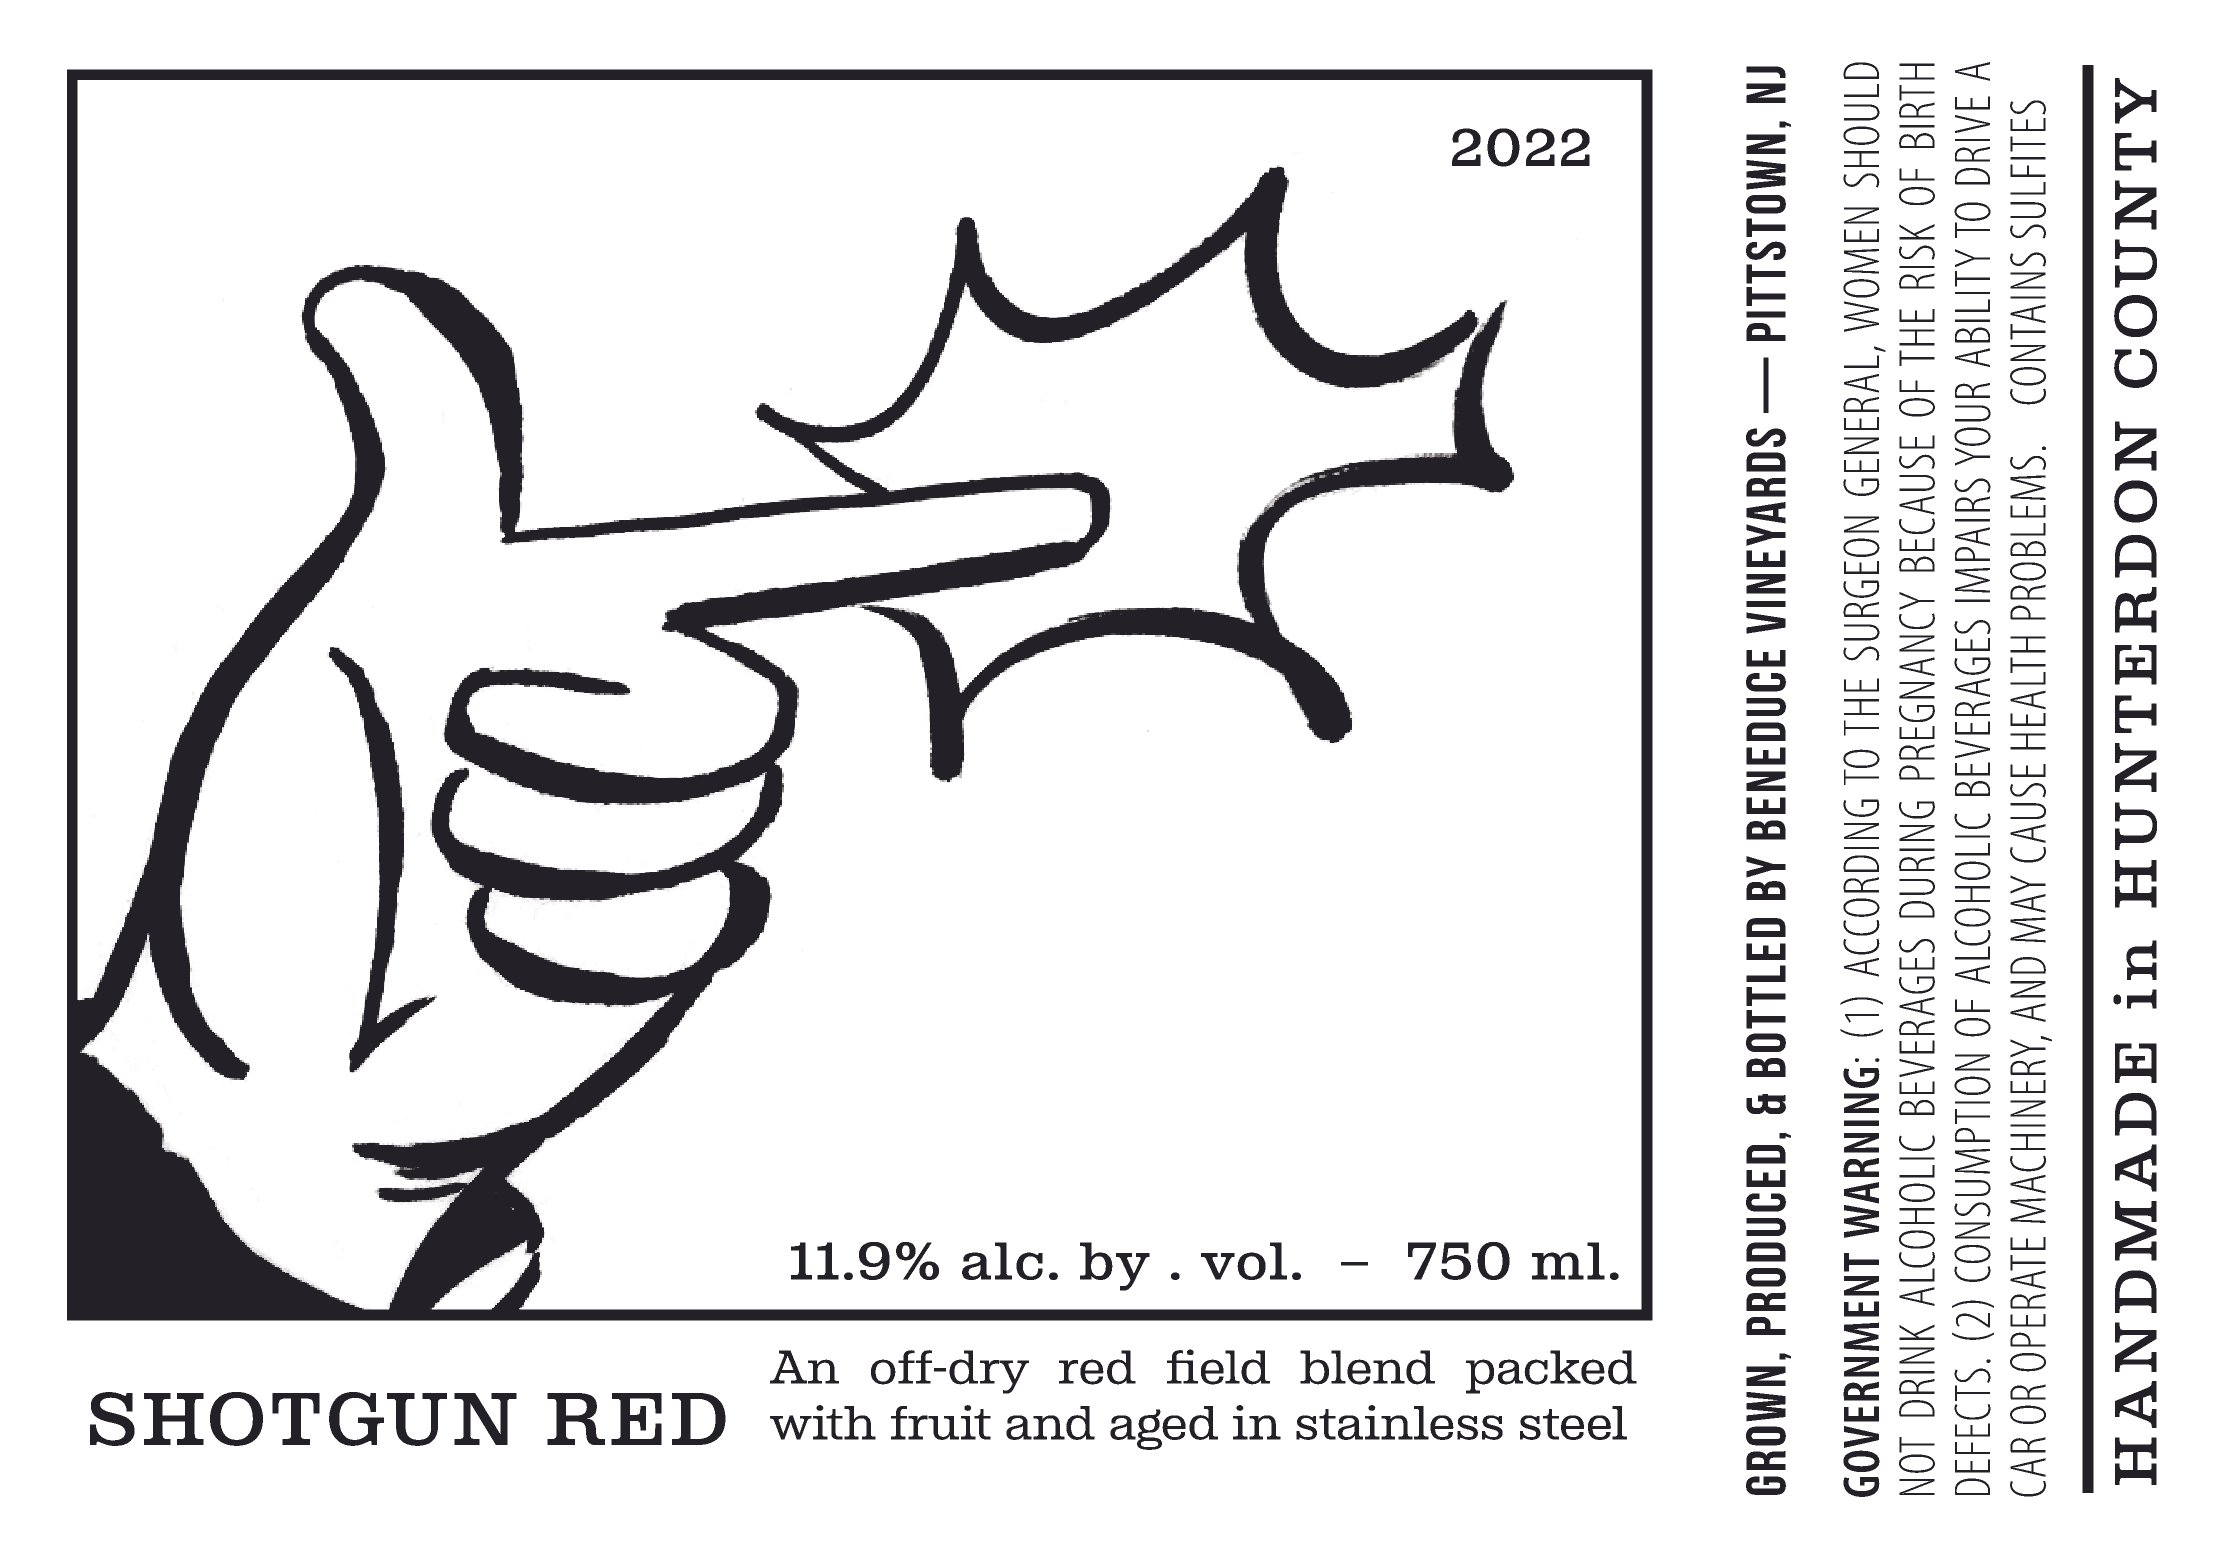 Product Image for 2022 Shotgun Red